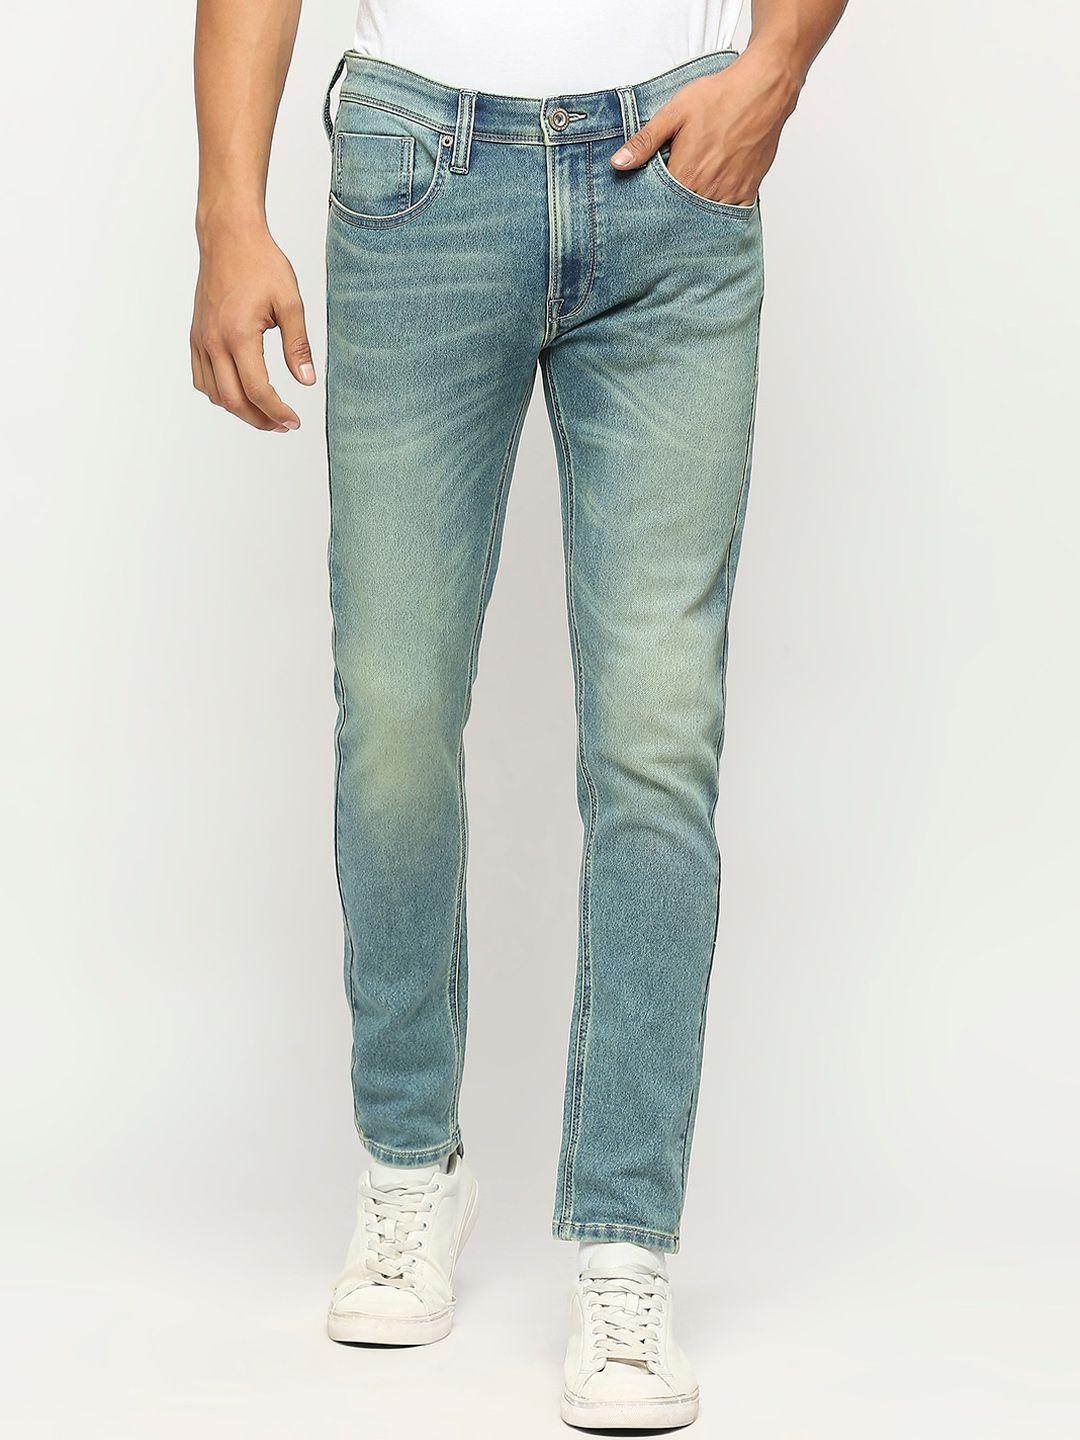 beat london by pepe jeans men clean look mid-rise heavy fade jeans